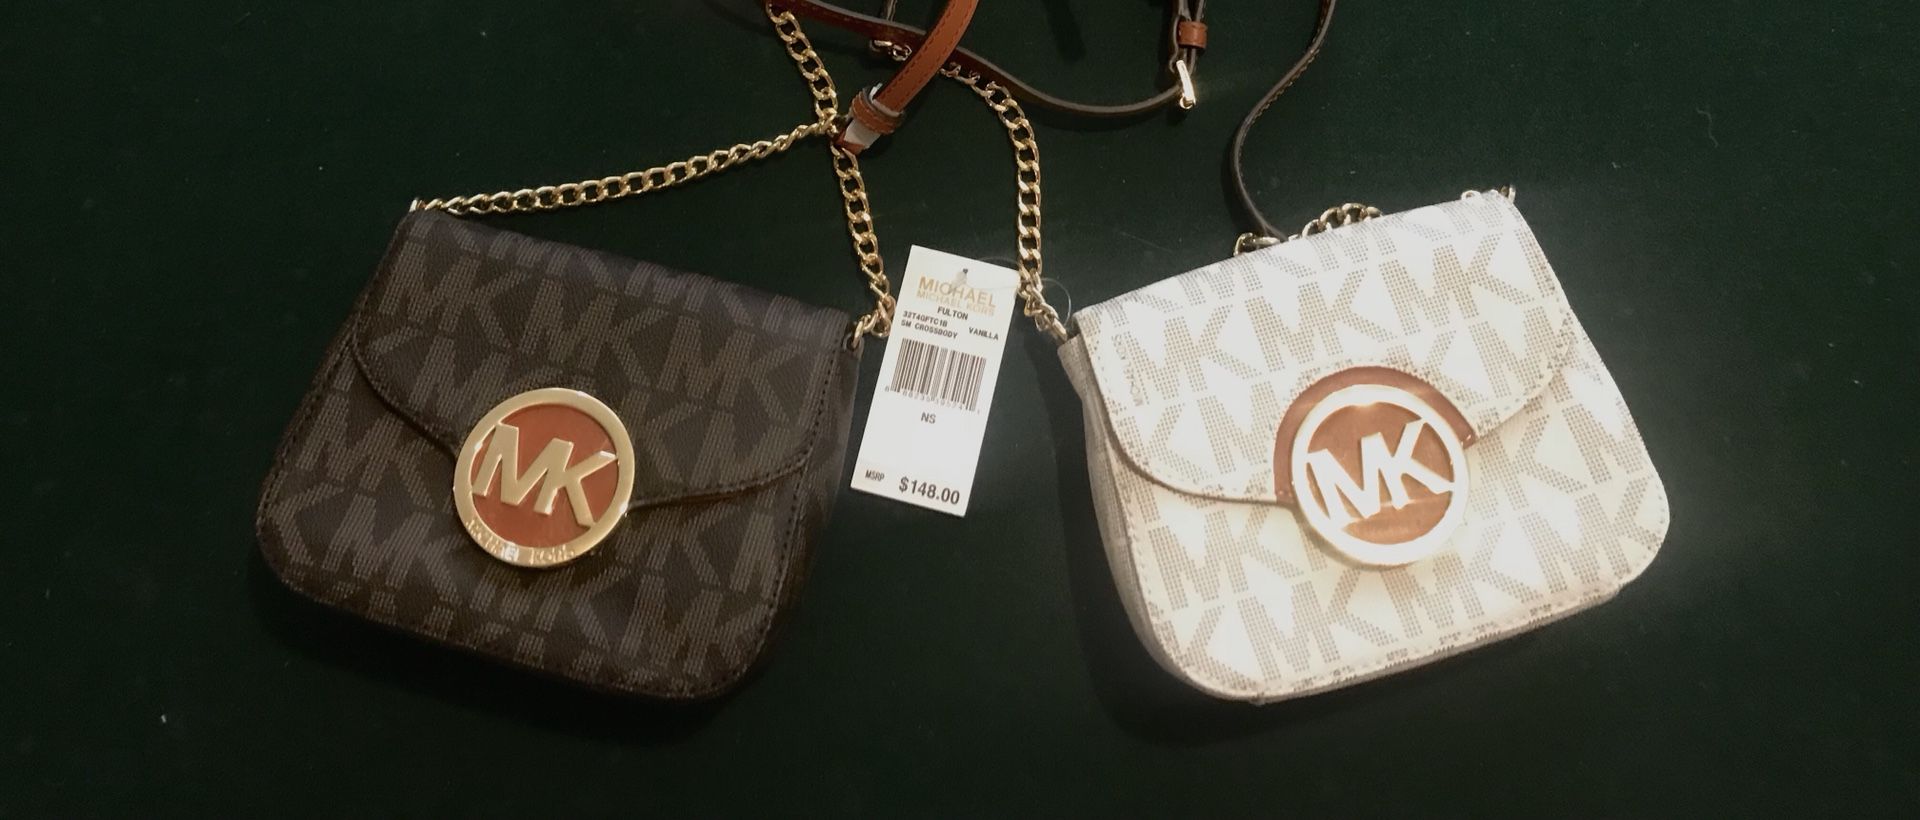 2 Michael Kors Bags (selling together: final price includes BOTH purses—2 for 1) (if you just want one or the other message me)